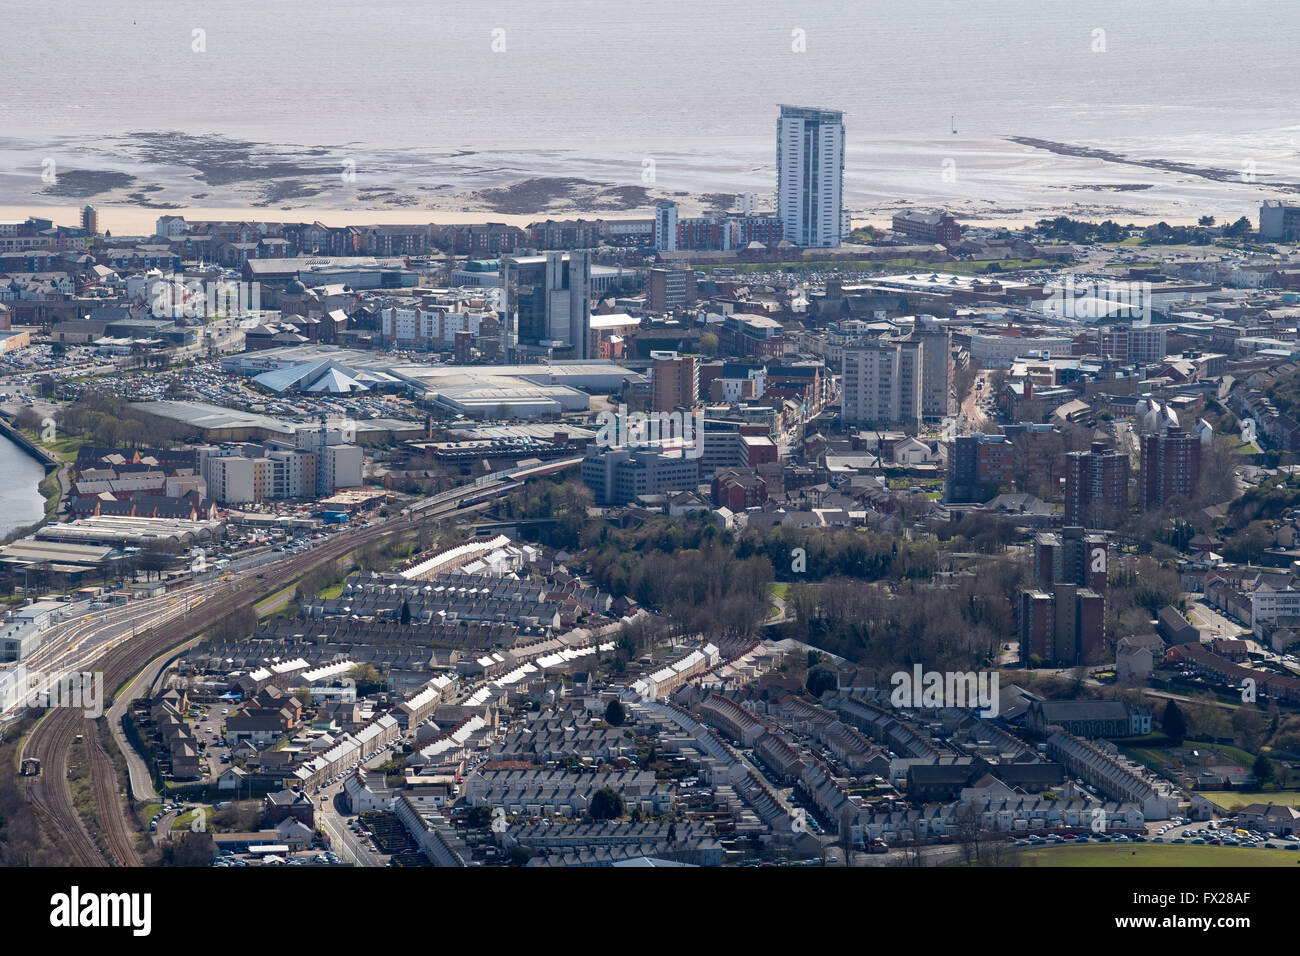 Aerial view of Swansea city centre showing the The Tower at Meridian Quay - the tallest building in Wales, the railway line and Stock Photo